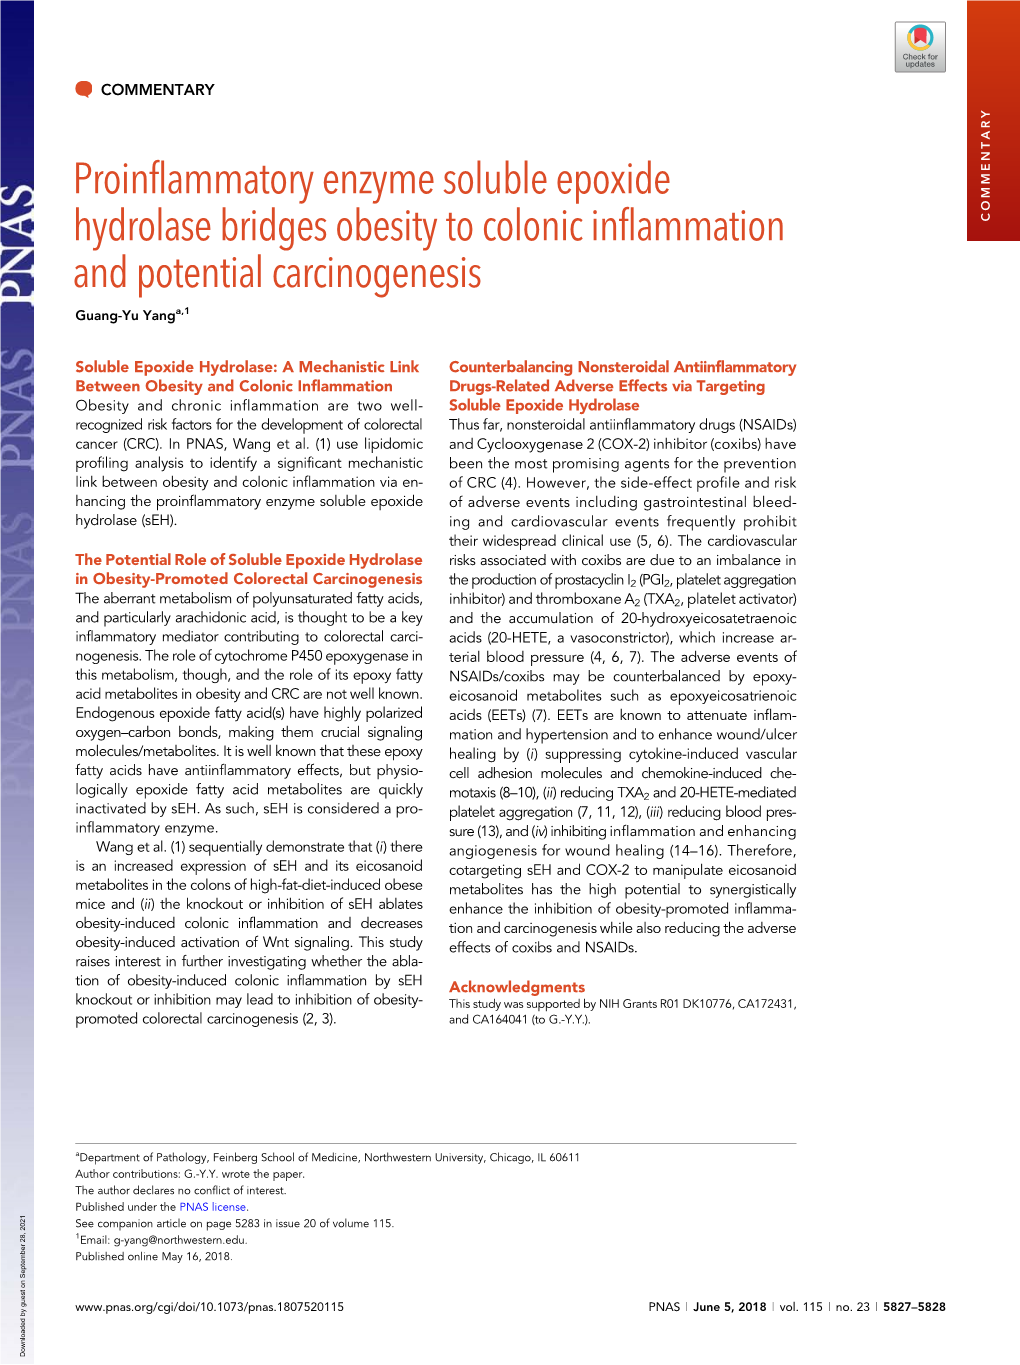 Proinflammatory Enzyme Soluble Epoxide Hydrolase Bridges Obesity to Colonic Inflammation COMMENTARY and Potential Carcinogenesis Guang-Yu Yanga,1